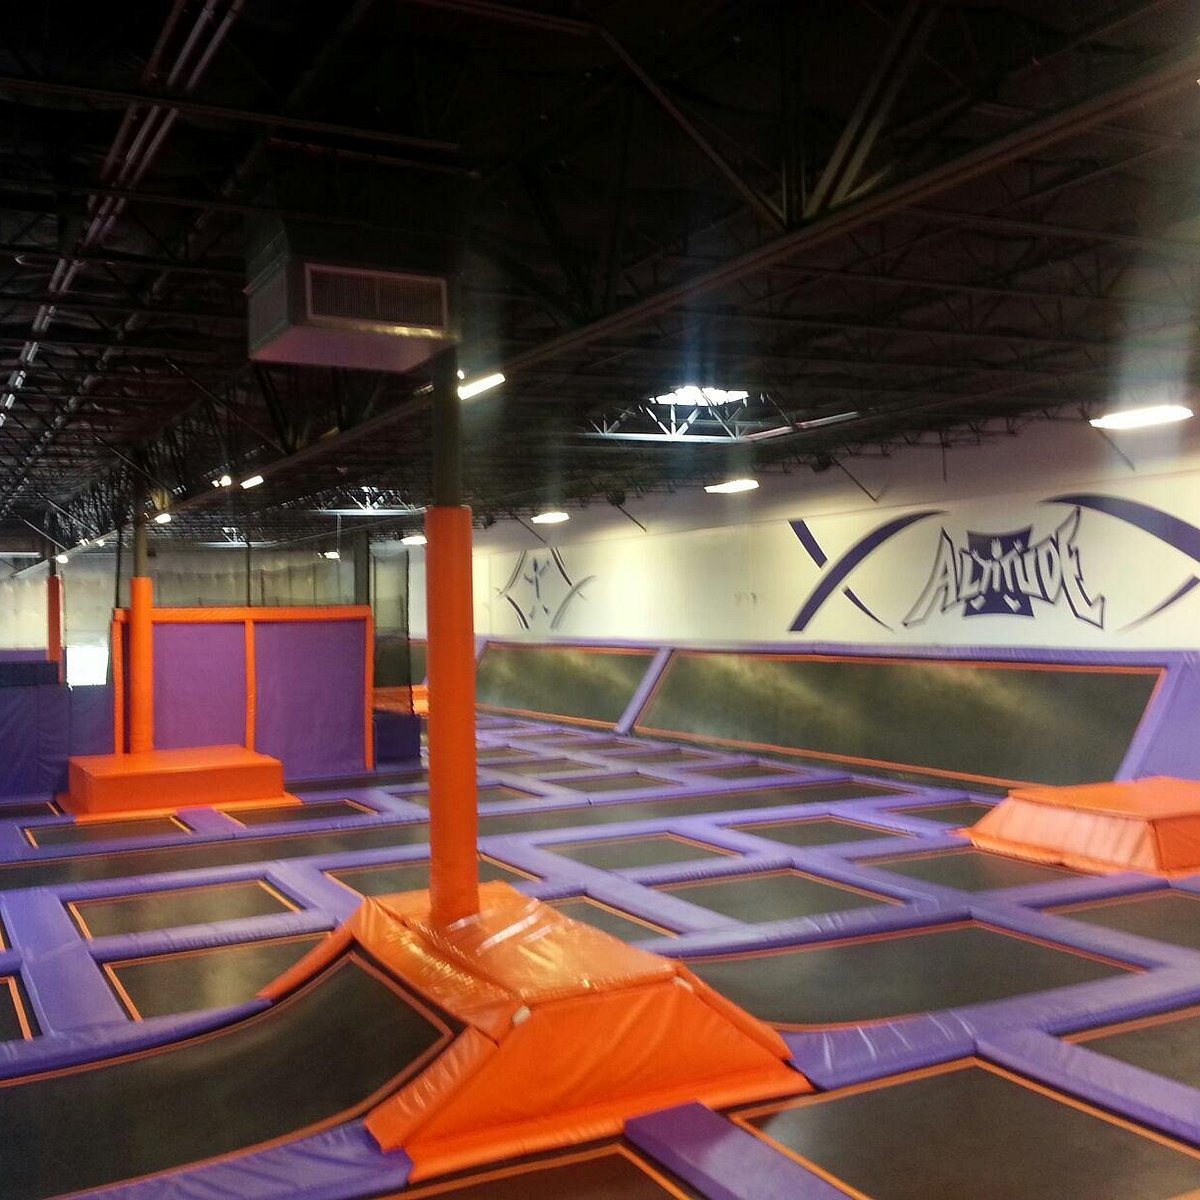 Collection 103+ Images altitude trampoline park fort worth photos Sharp